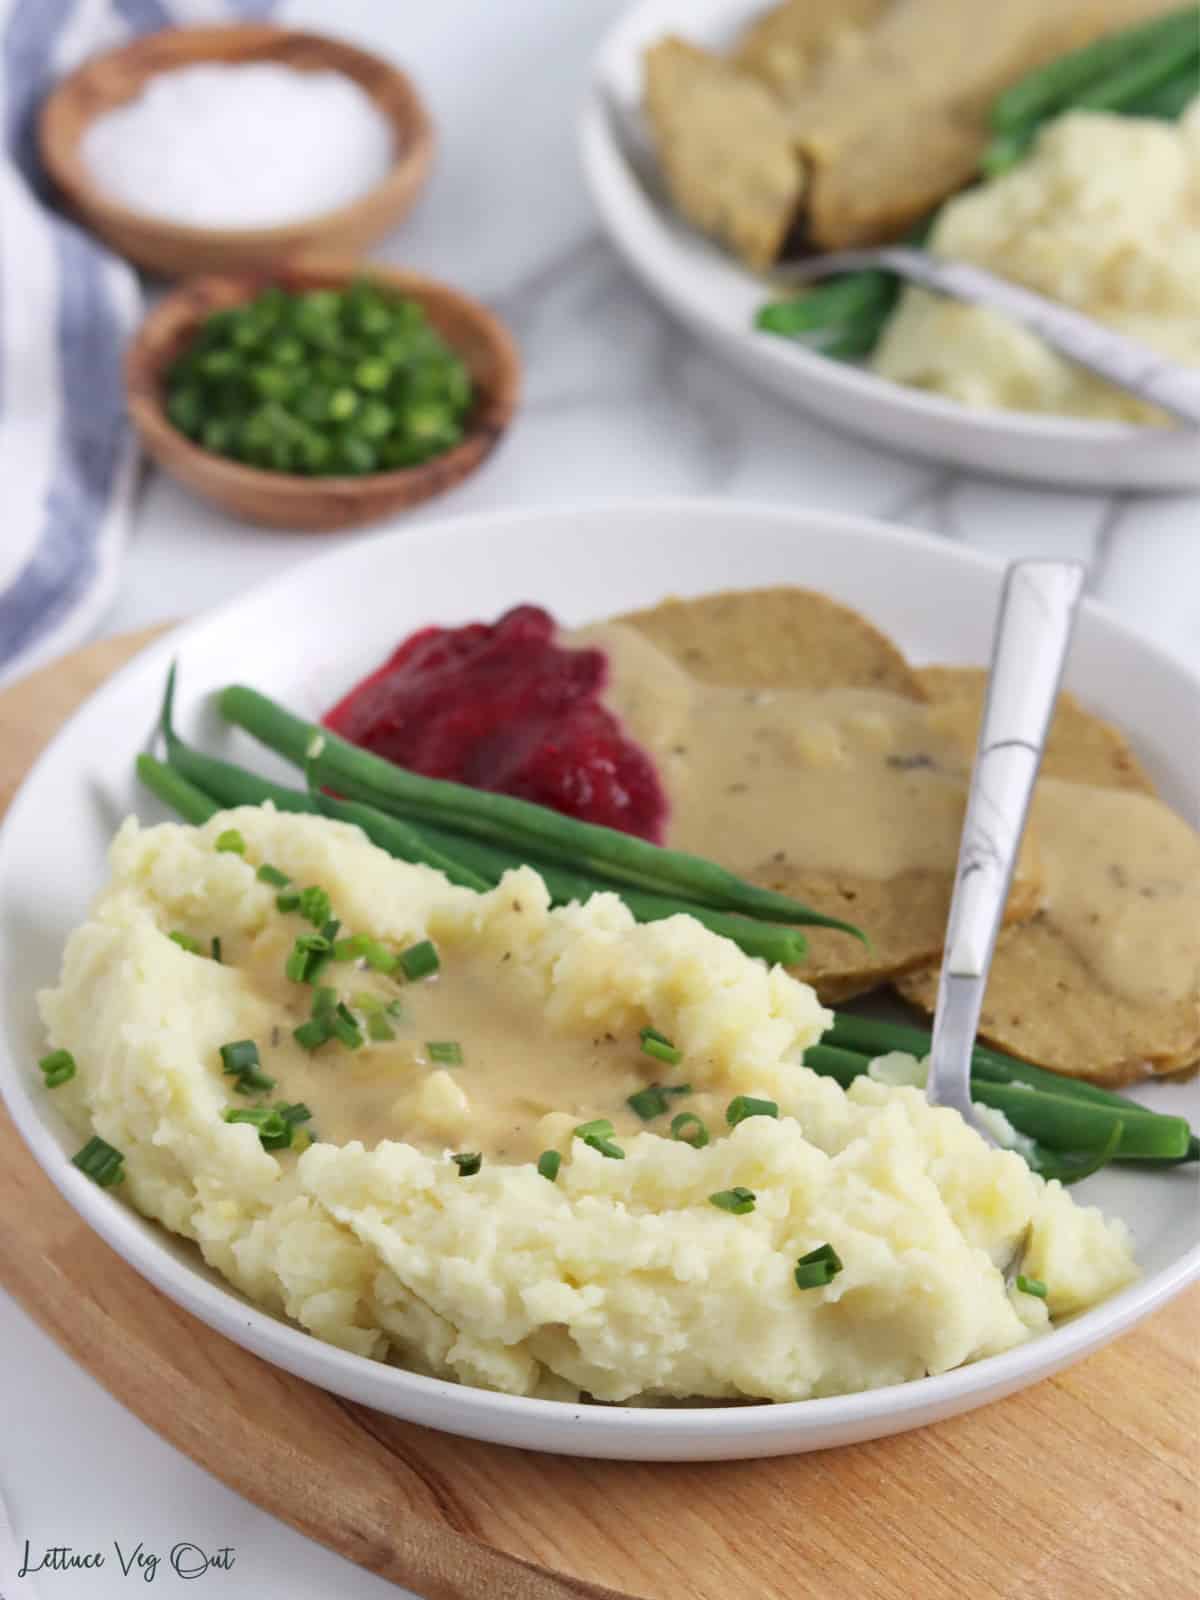 Plate with pile of fluffy, creamy mashed potatoes topped with gravy and chives with some vegan turkey, green beans and cranberry sauce on back of plate.